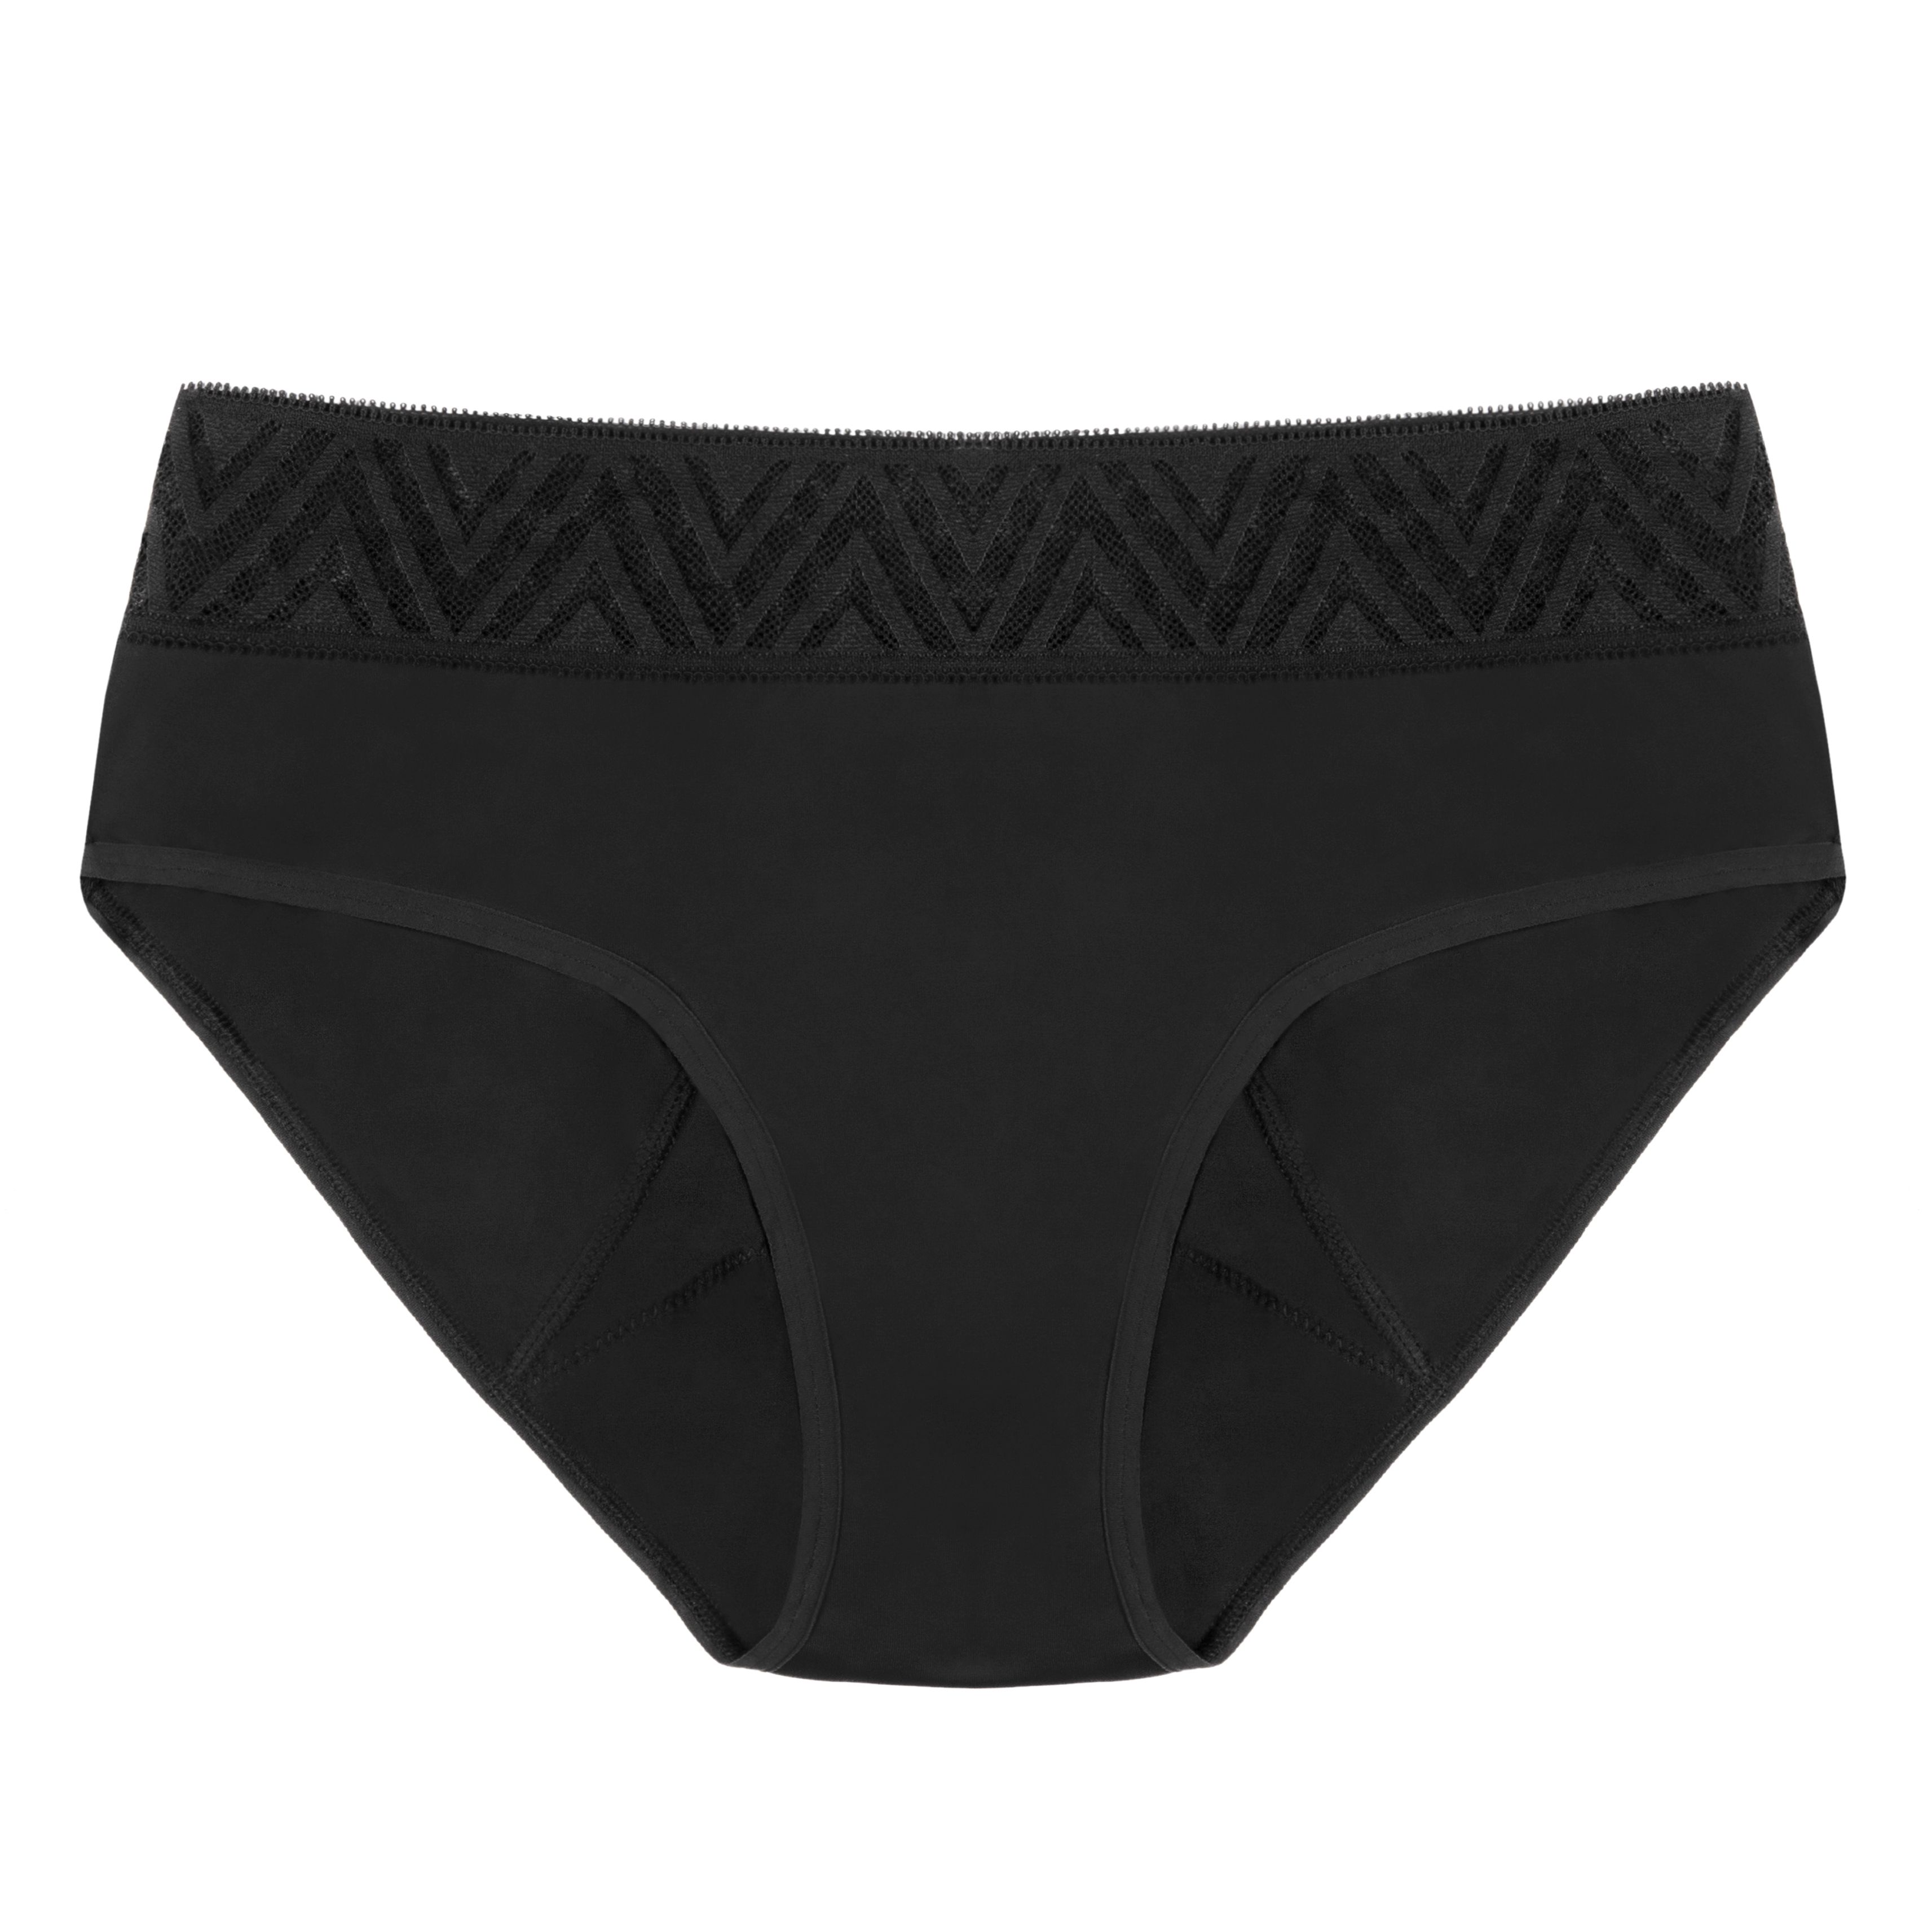 DISCThinx Period Proof Hiphugger Black - L (New Geo Lace)